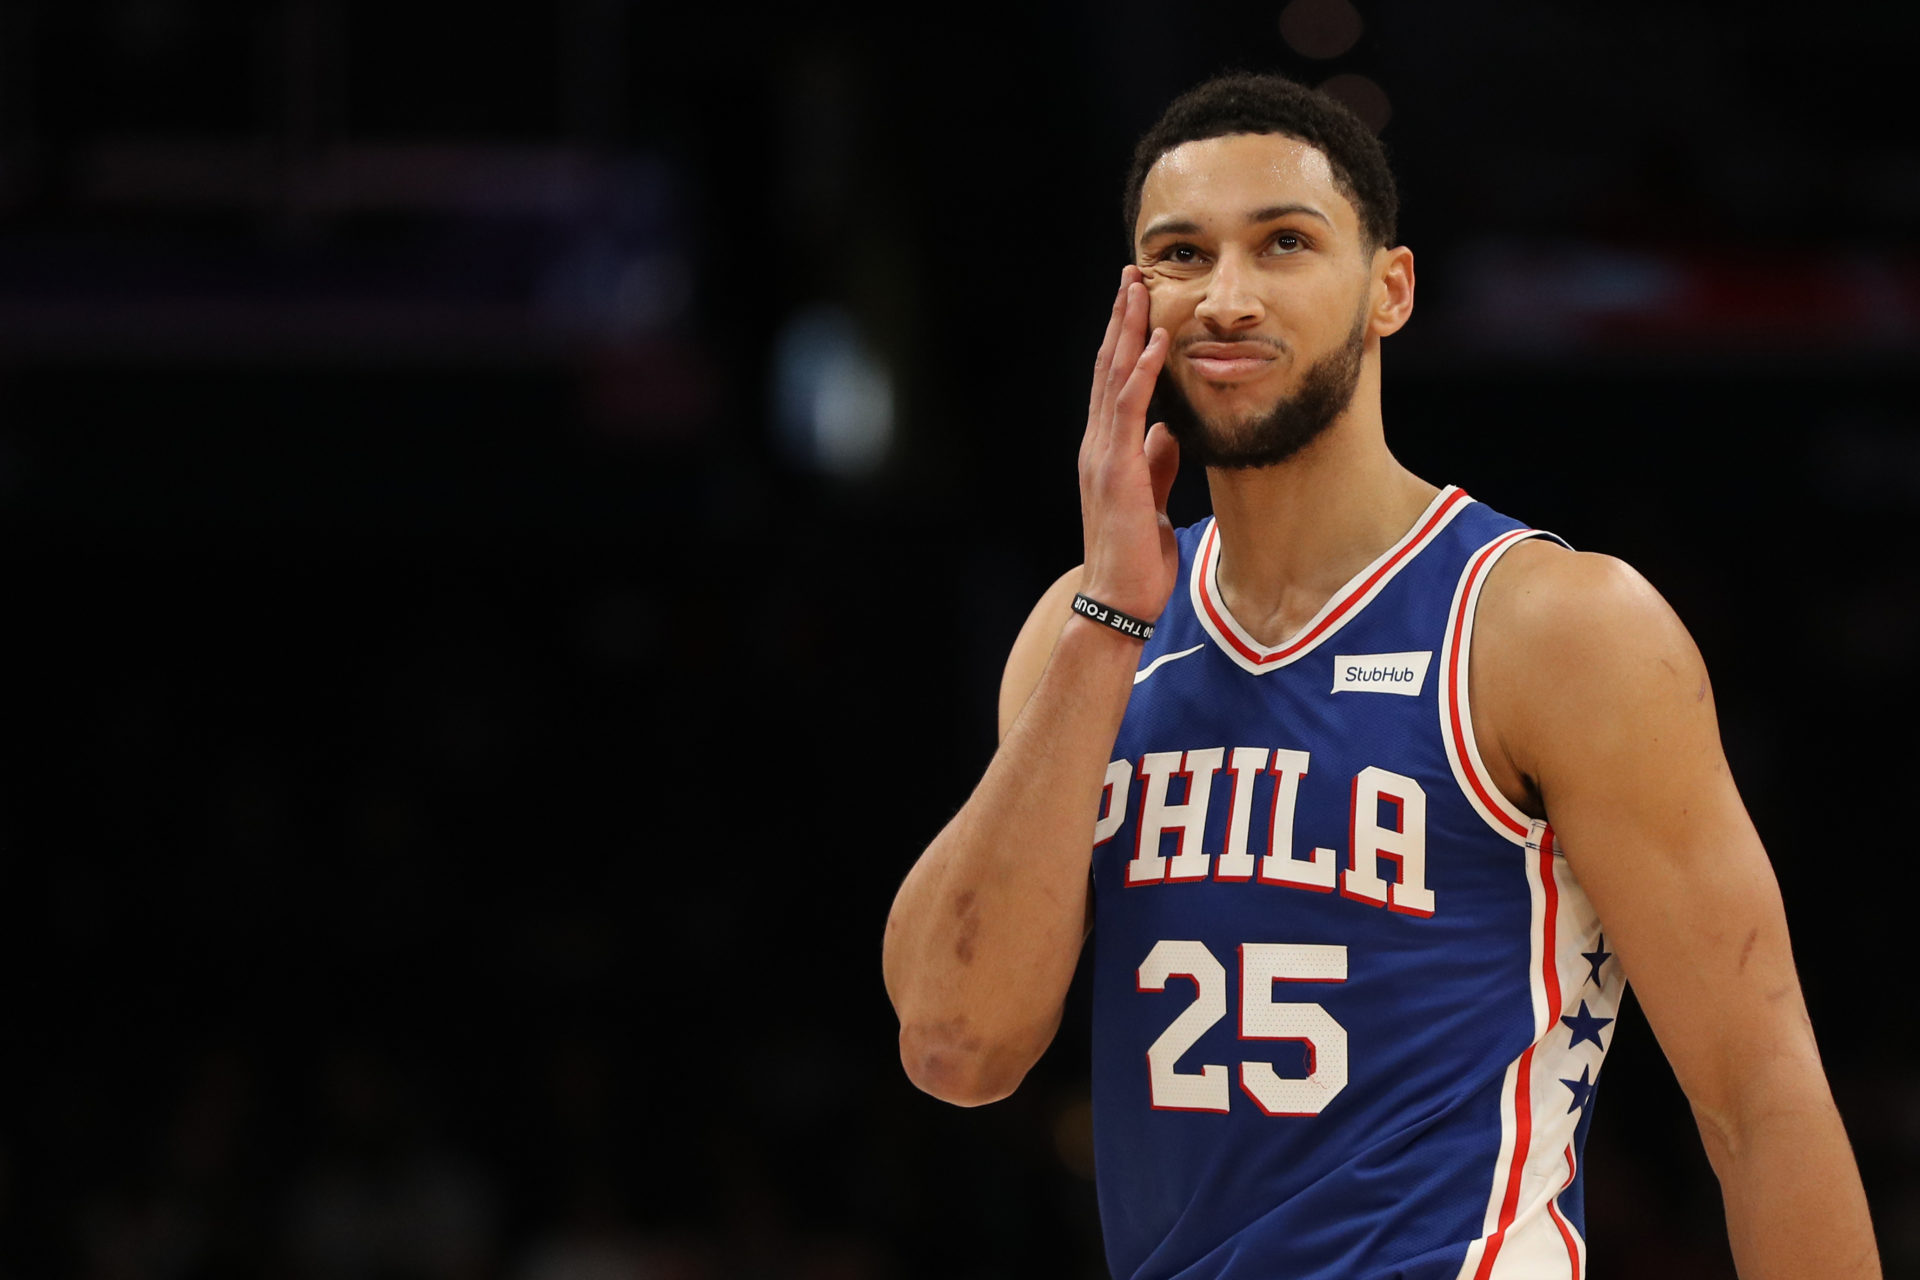 James Harden and Ben Simmons' new jersey numbers revealed – NBC Sports  Philadelphia